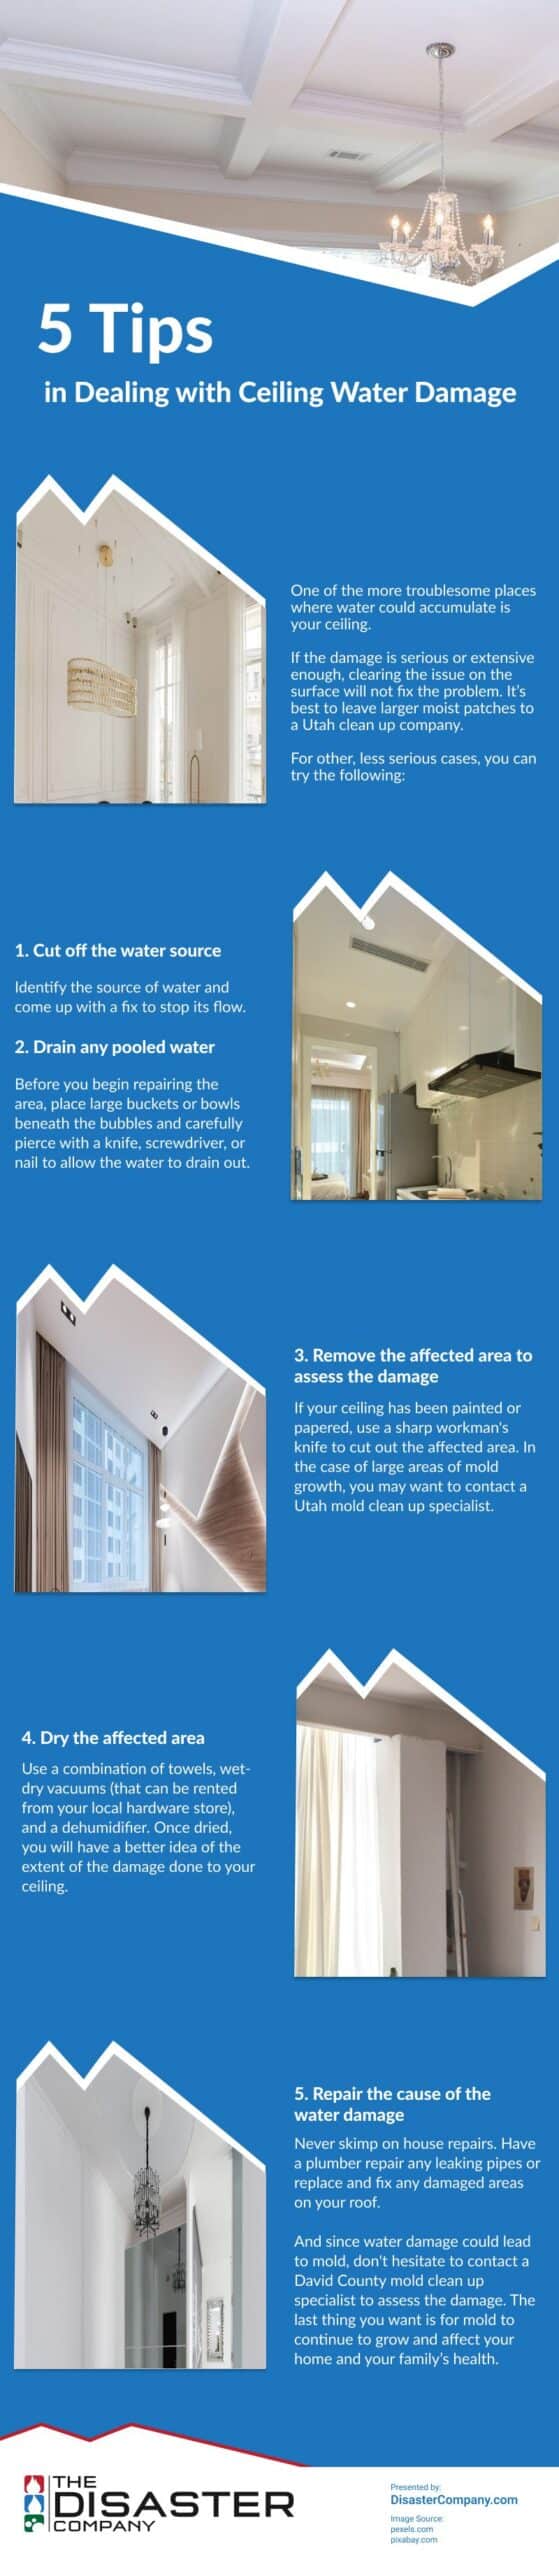 5 Tips in Dealing with Ceiling Water Damage Infographic